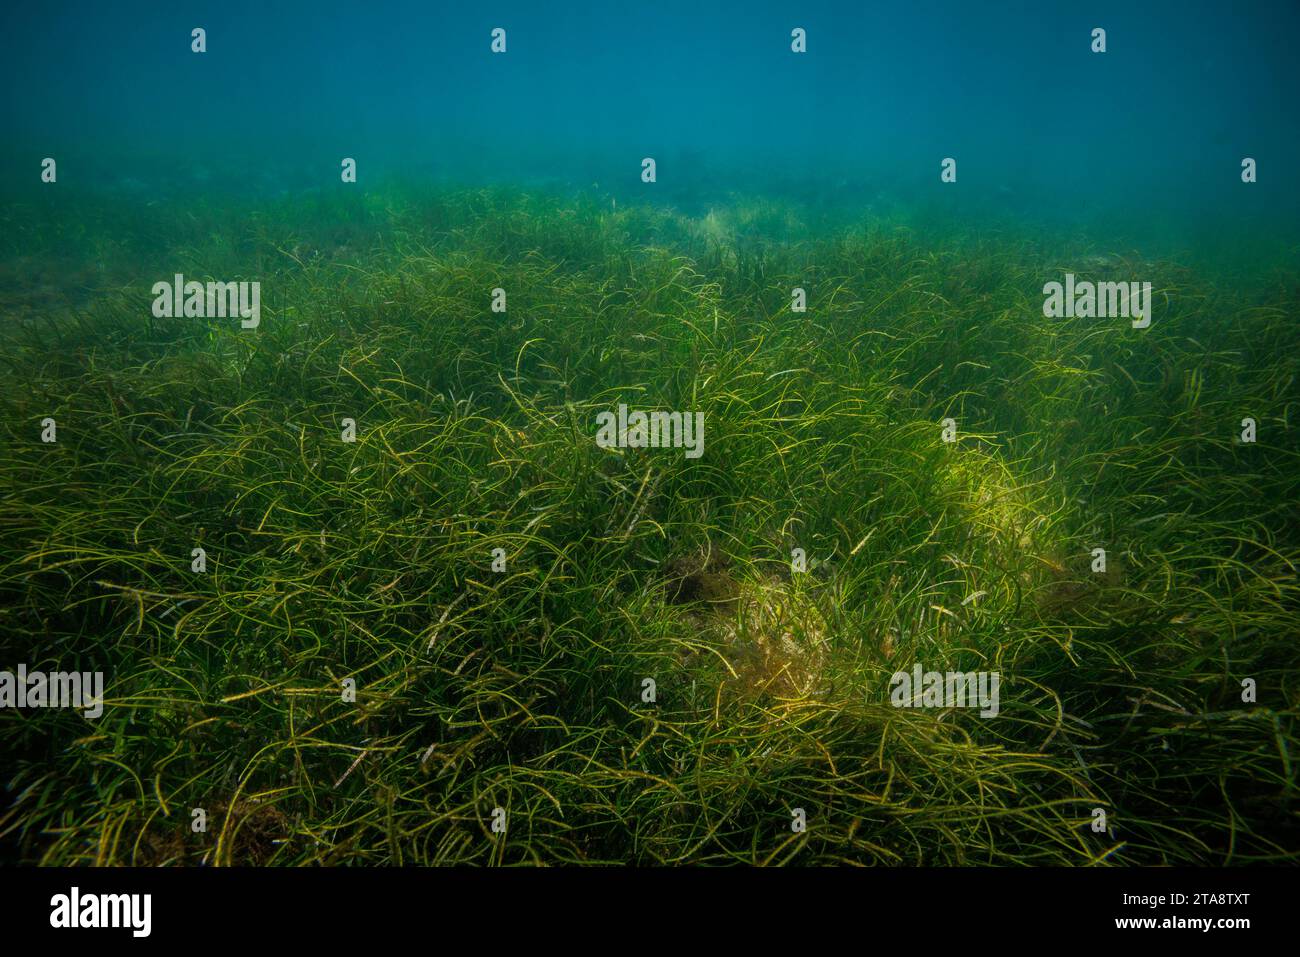 Dugongs are often seen feeding on this bed of seagrass off the coast of Baucau, The Democratic Republic of Timor-Leste. Stock Photo